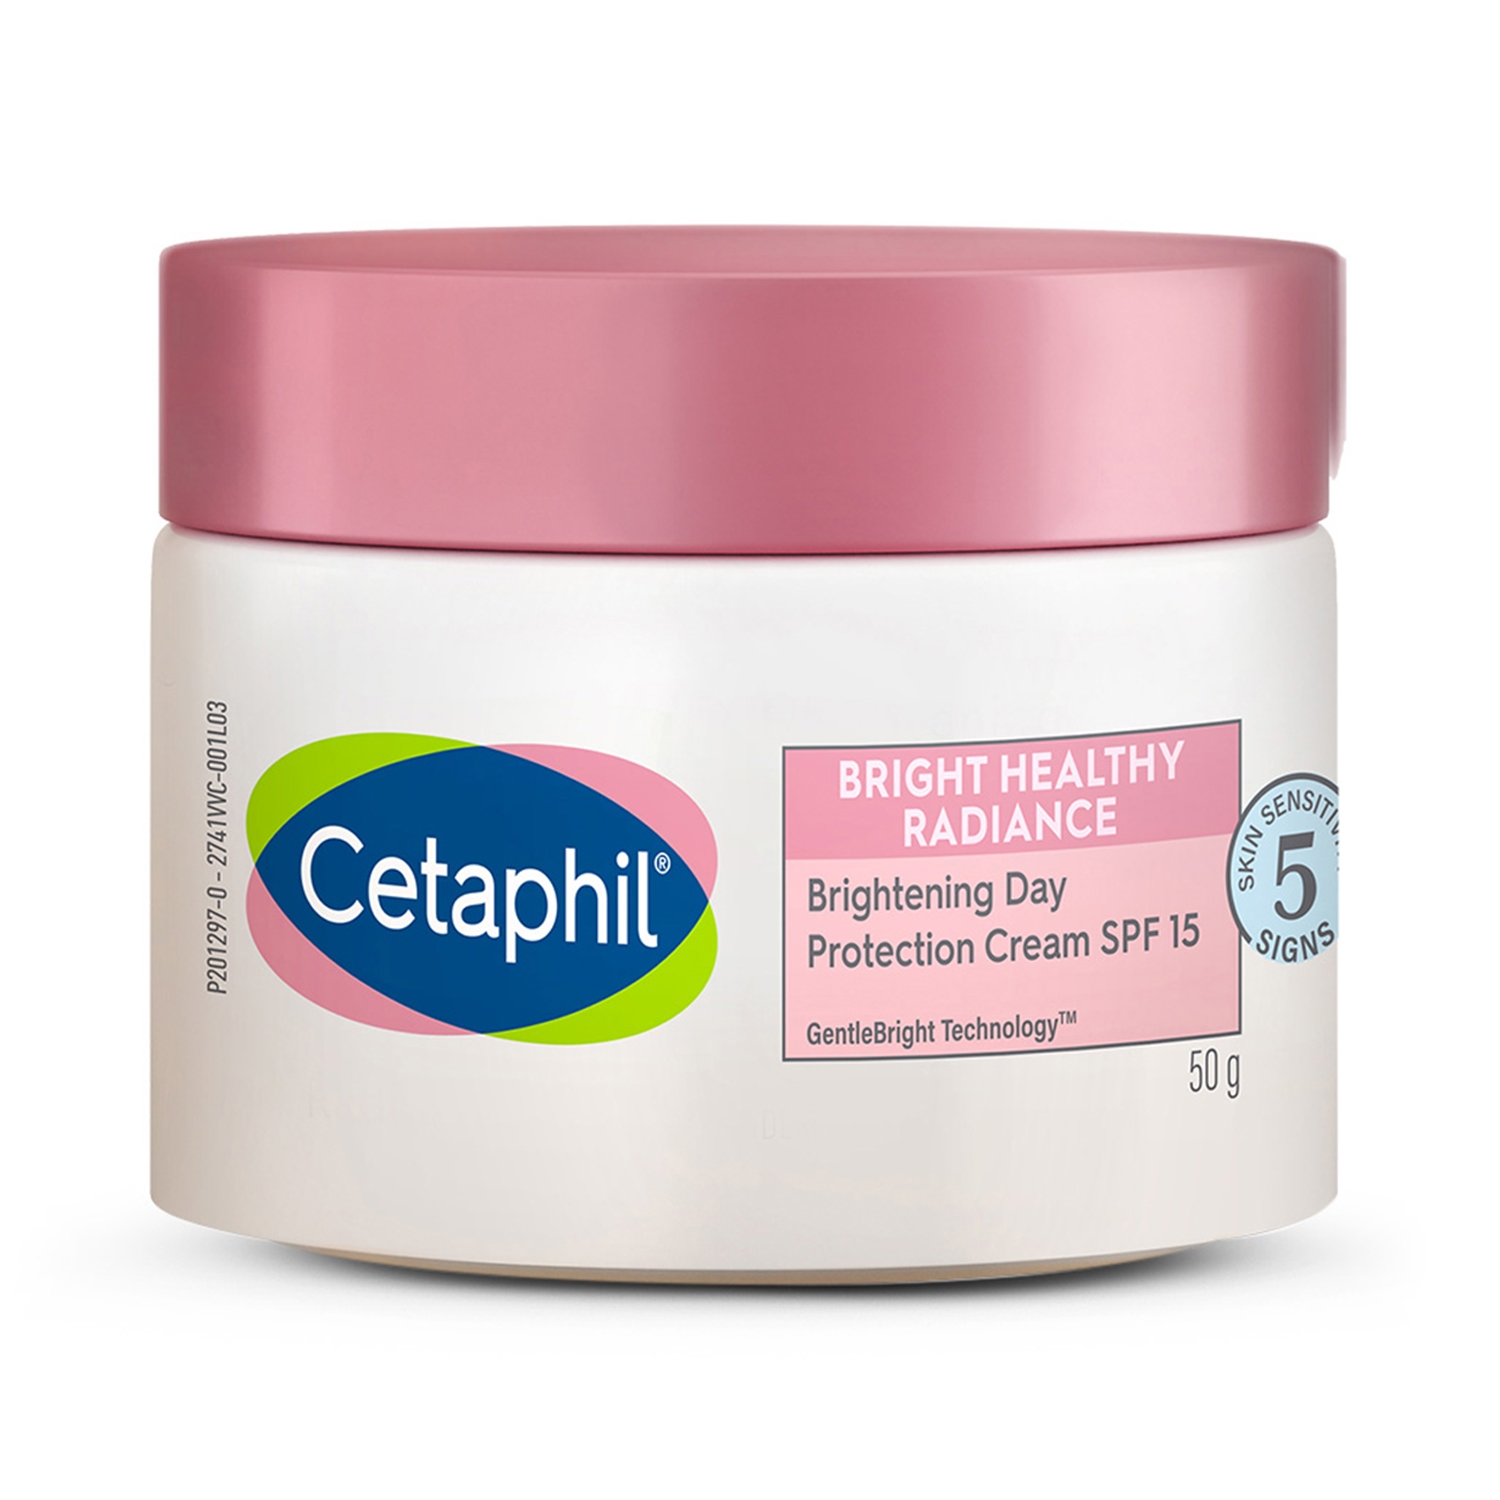 Cetaphil | Cetaphil Bright Healthy Radiance Day Protection Cream SPF15 (50g)